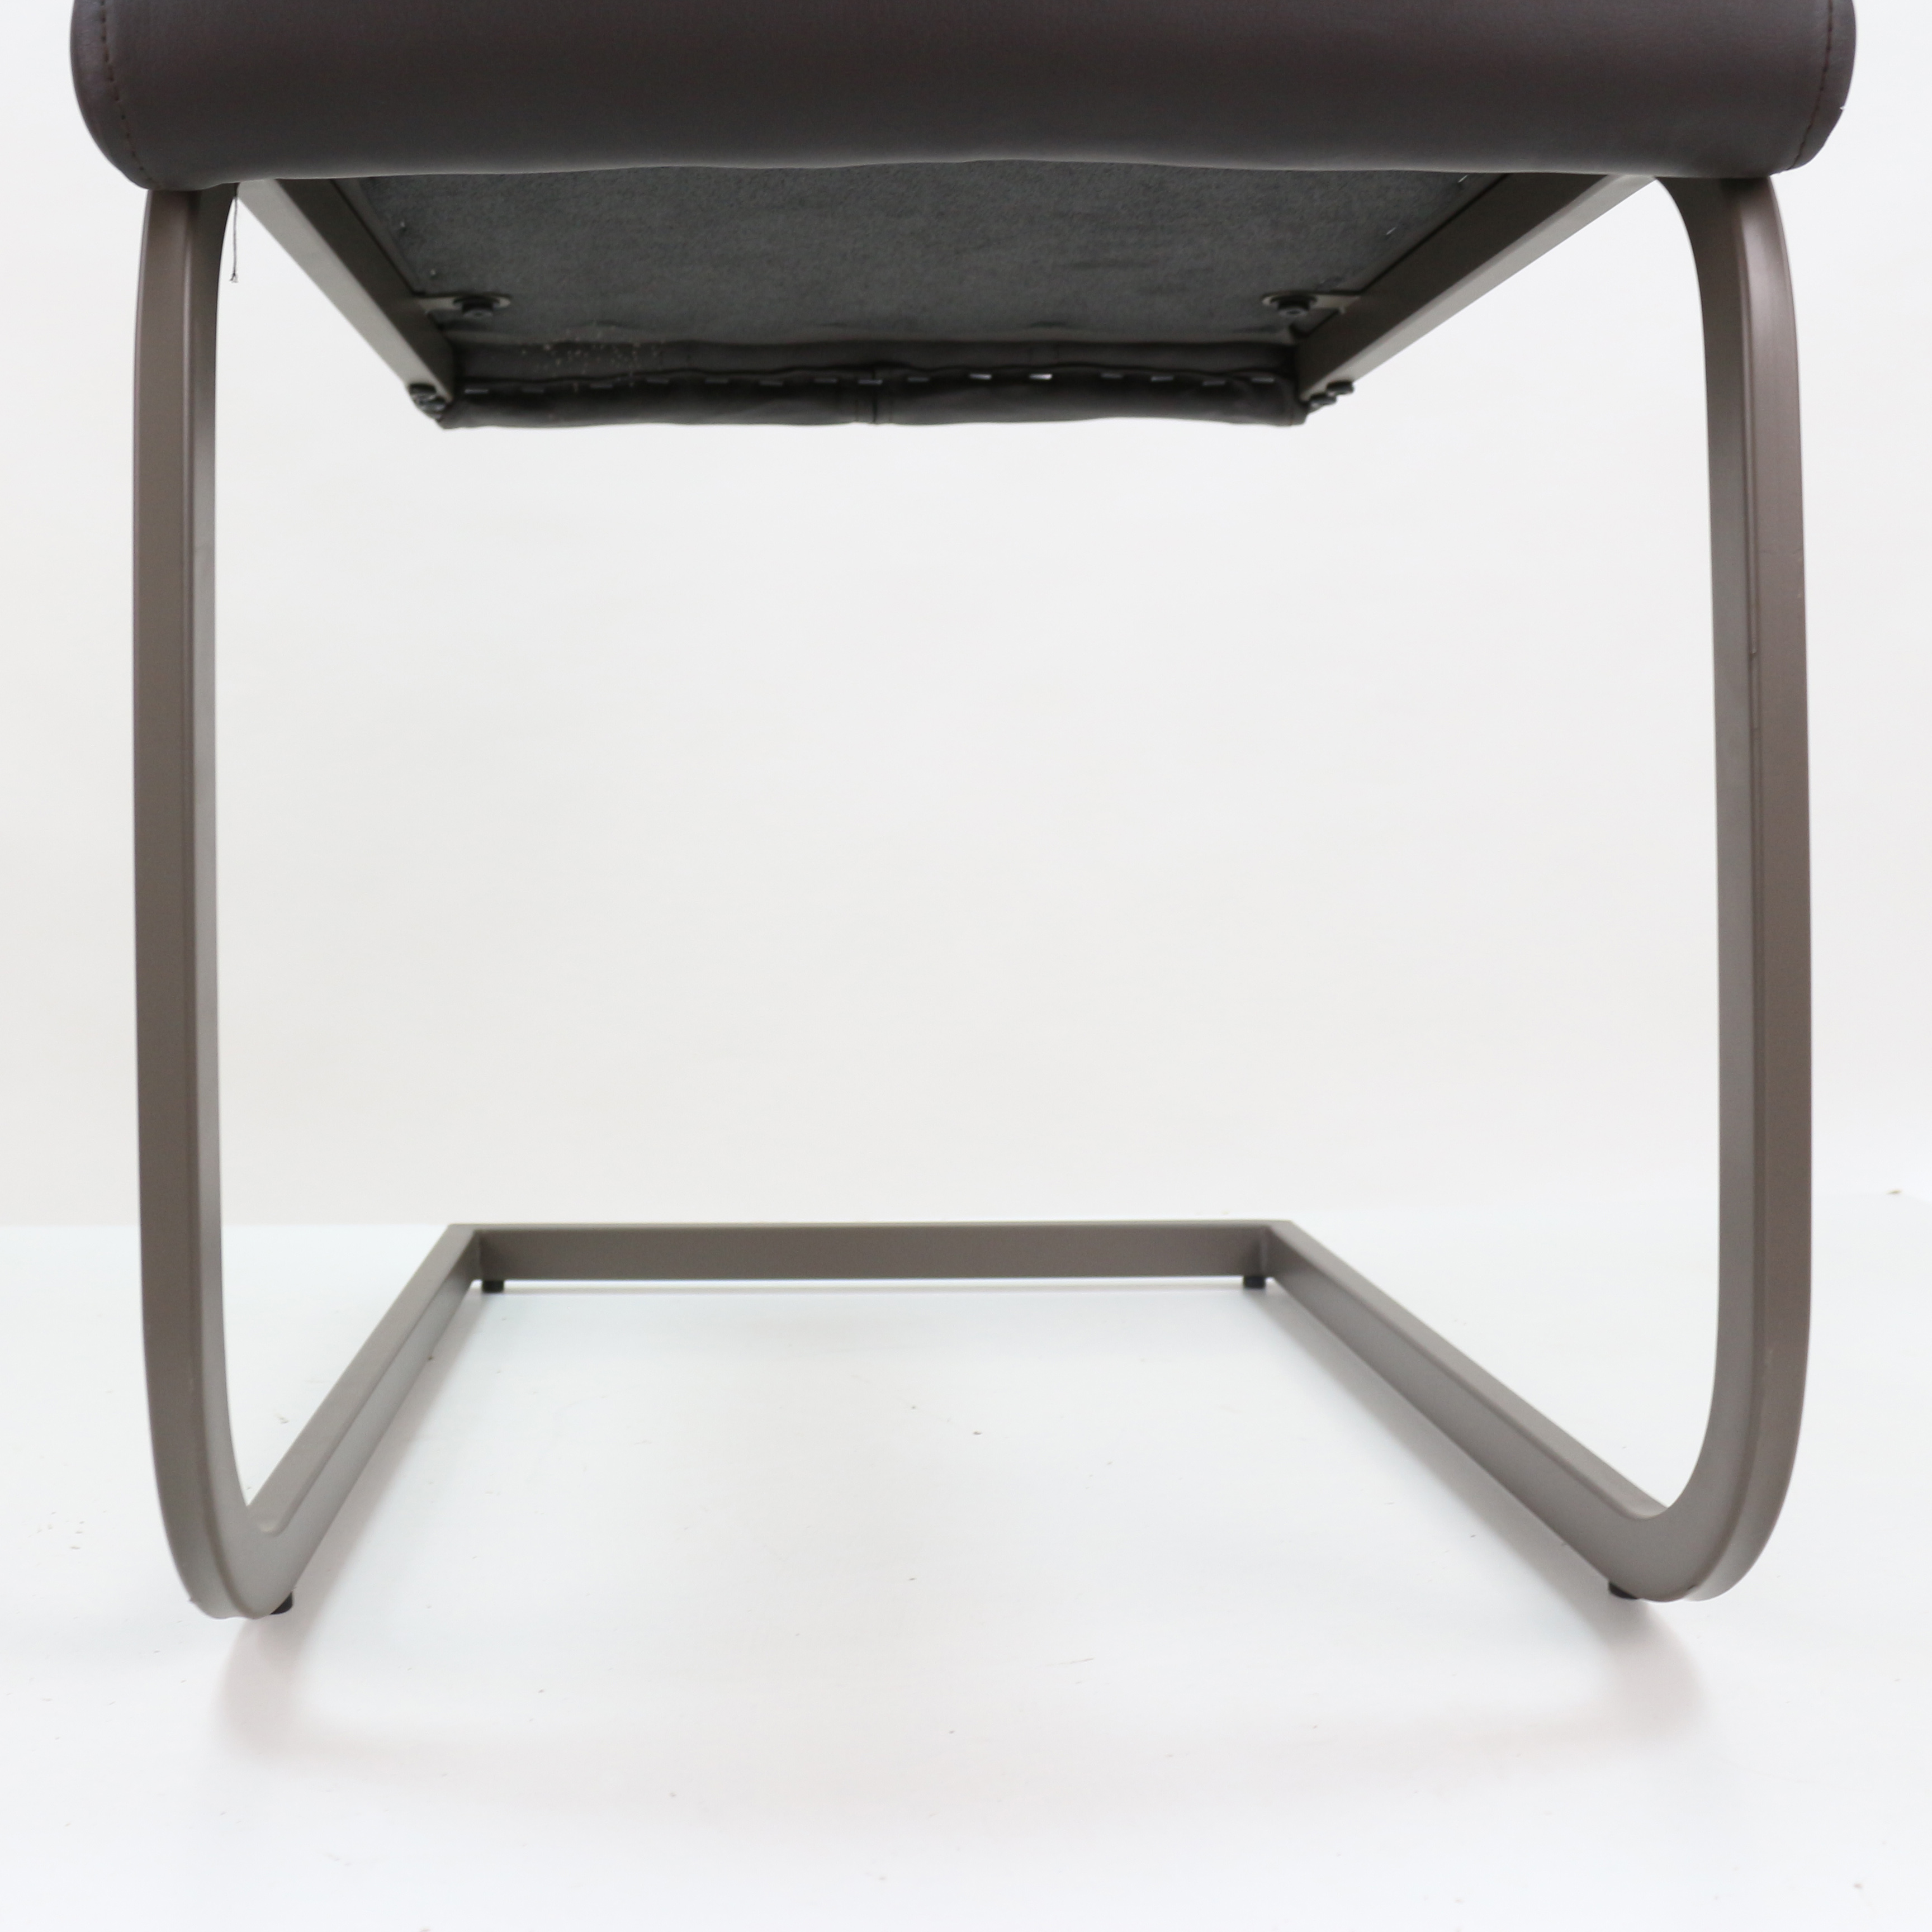 Modern PU Metal Leg Dining Chair for dining room or living room